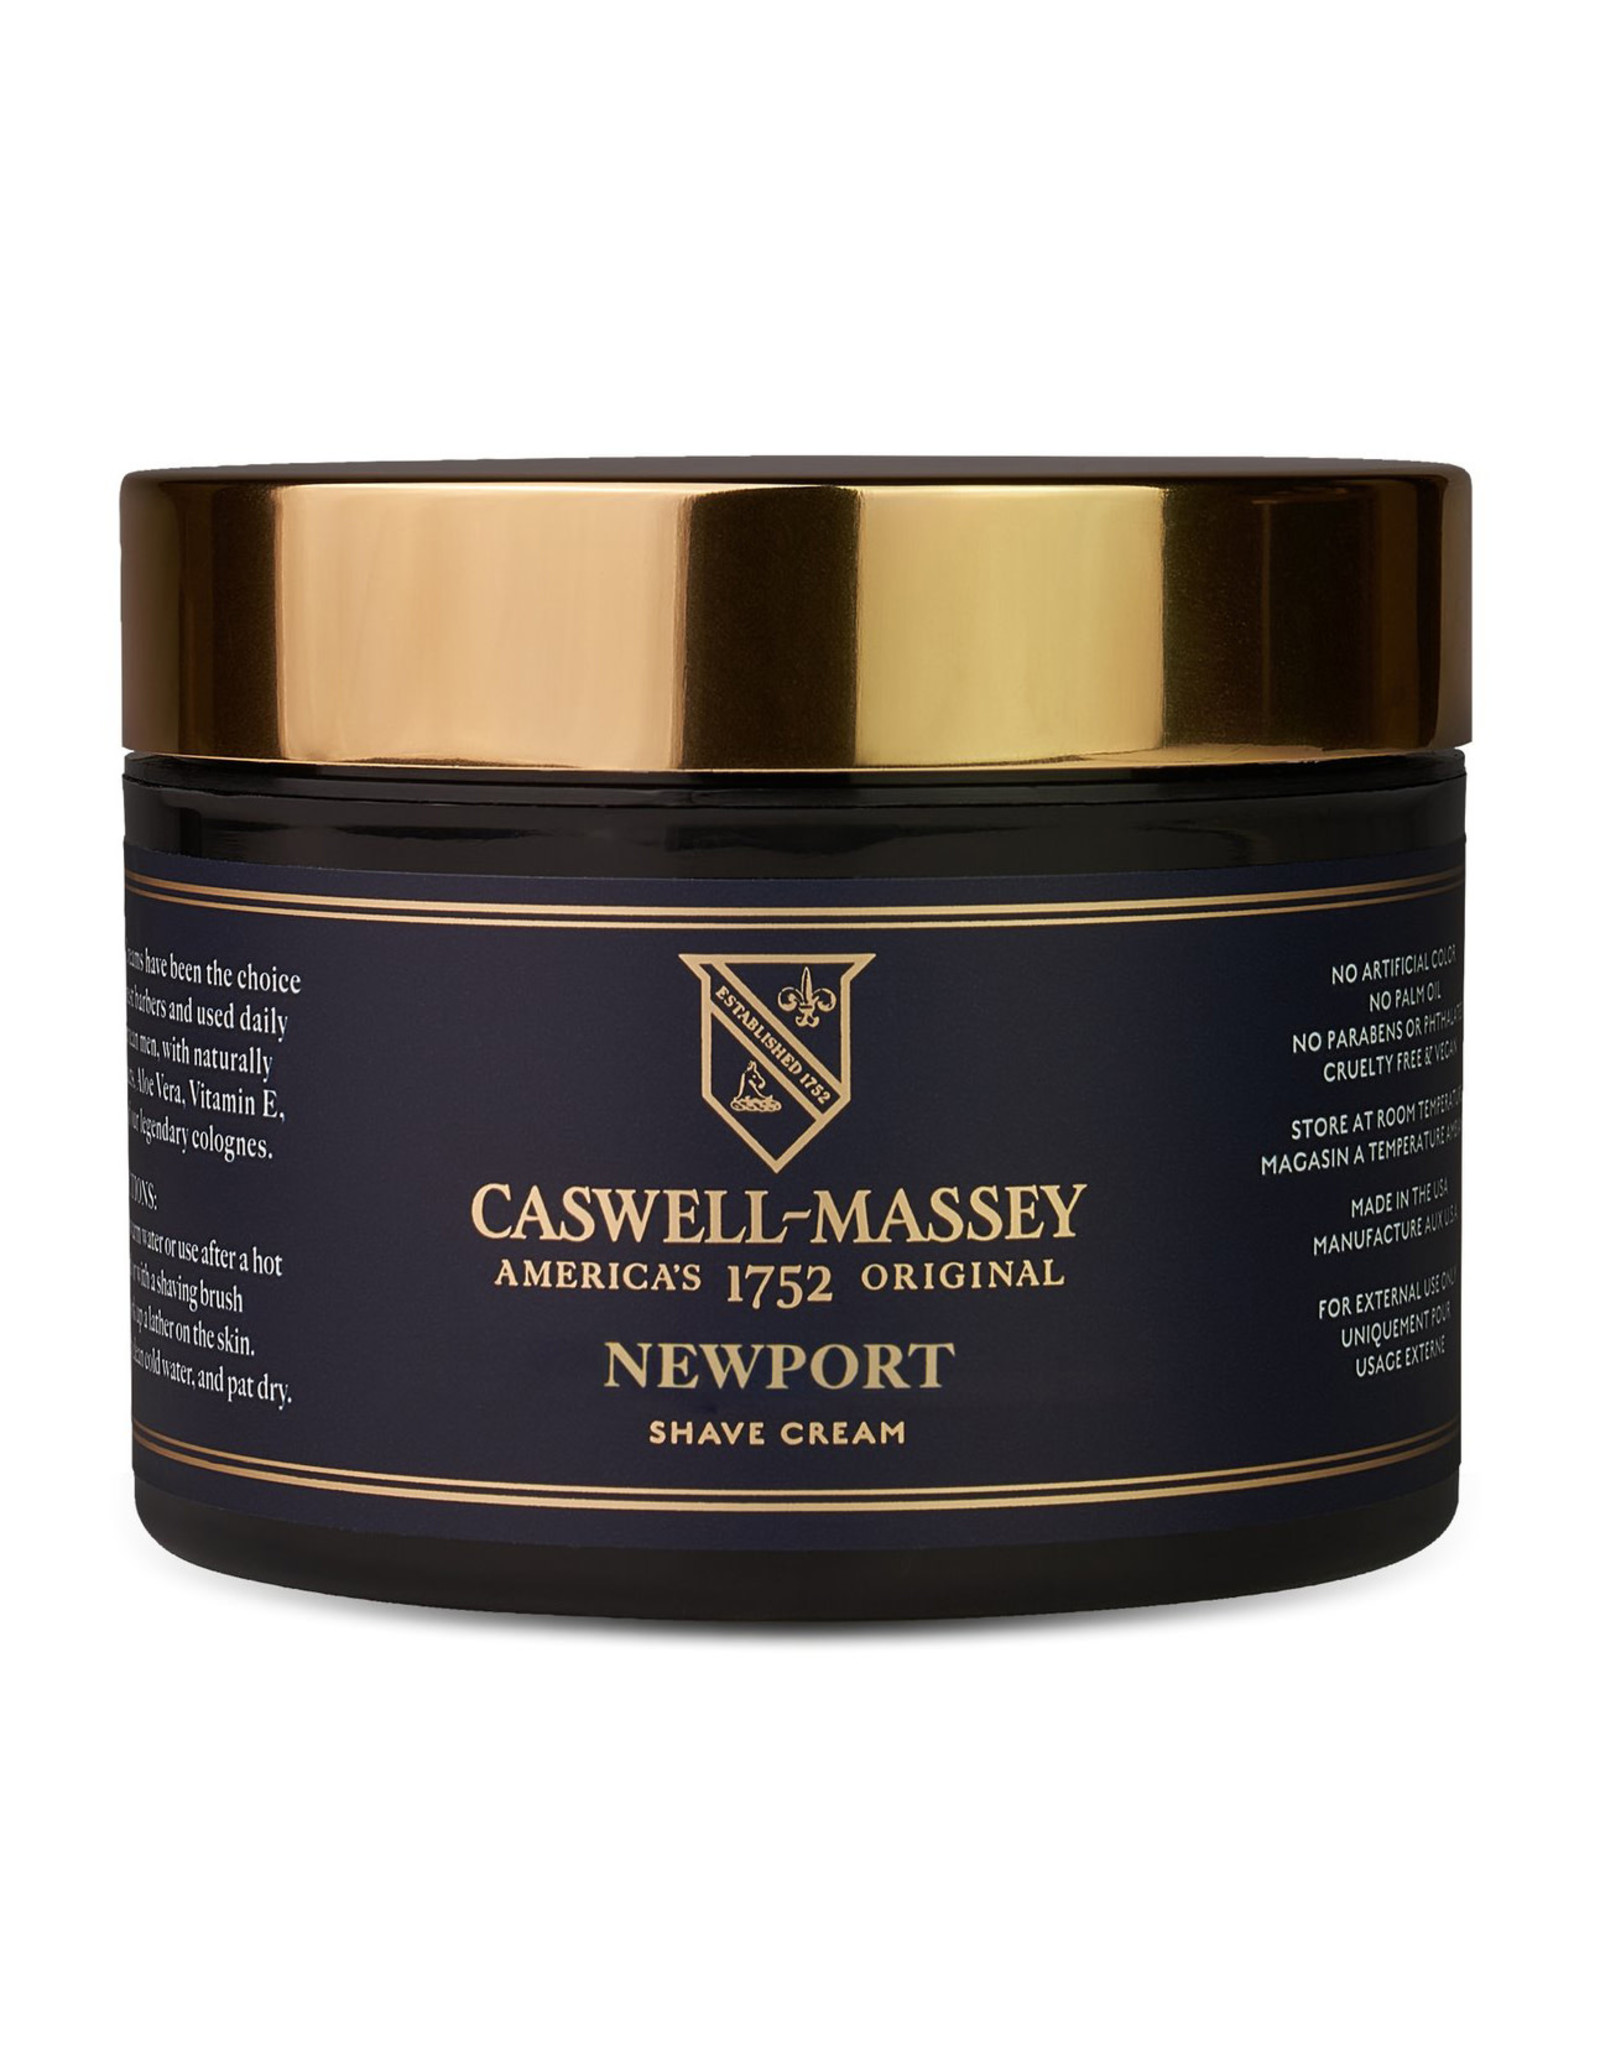 Caswell-Massey Apothecary Heritage Newport Shave Cream in Jar | 8oz